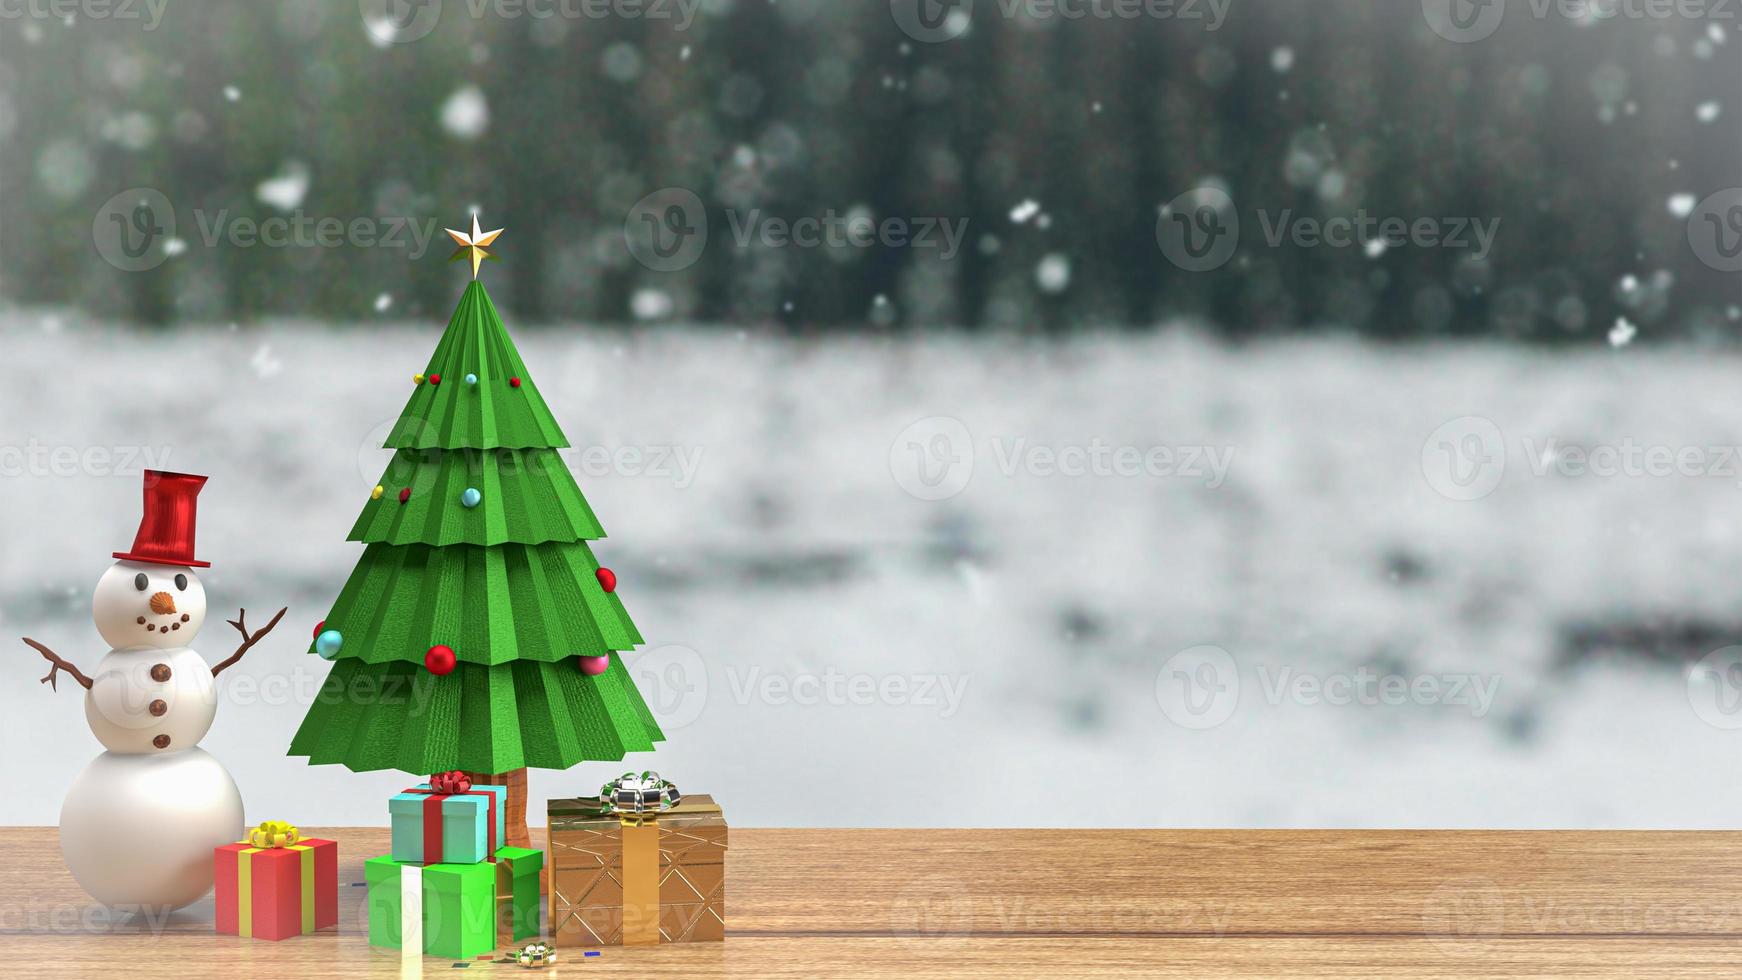 The Christmas tree and snow man on wood table for holiday celebration or  promotion business background 3d rendering photo